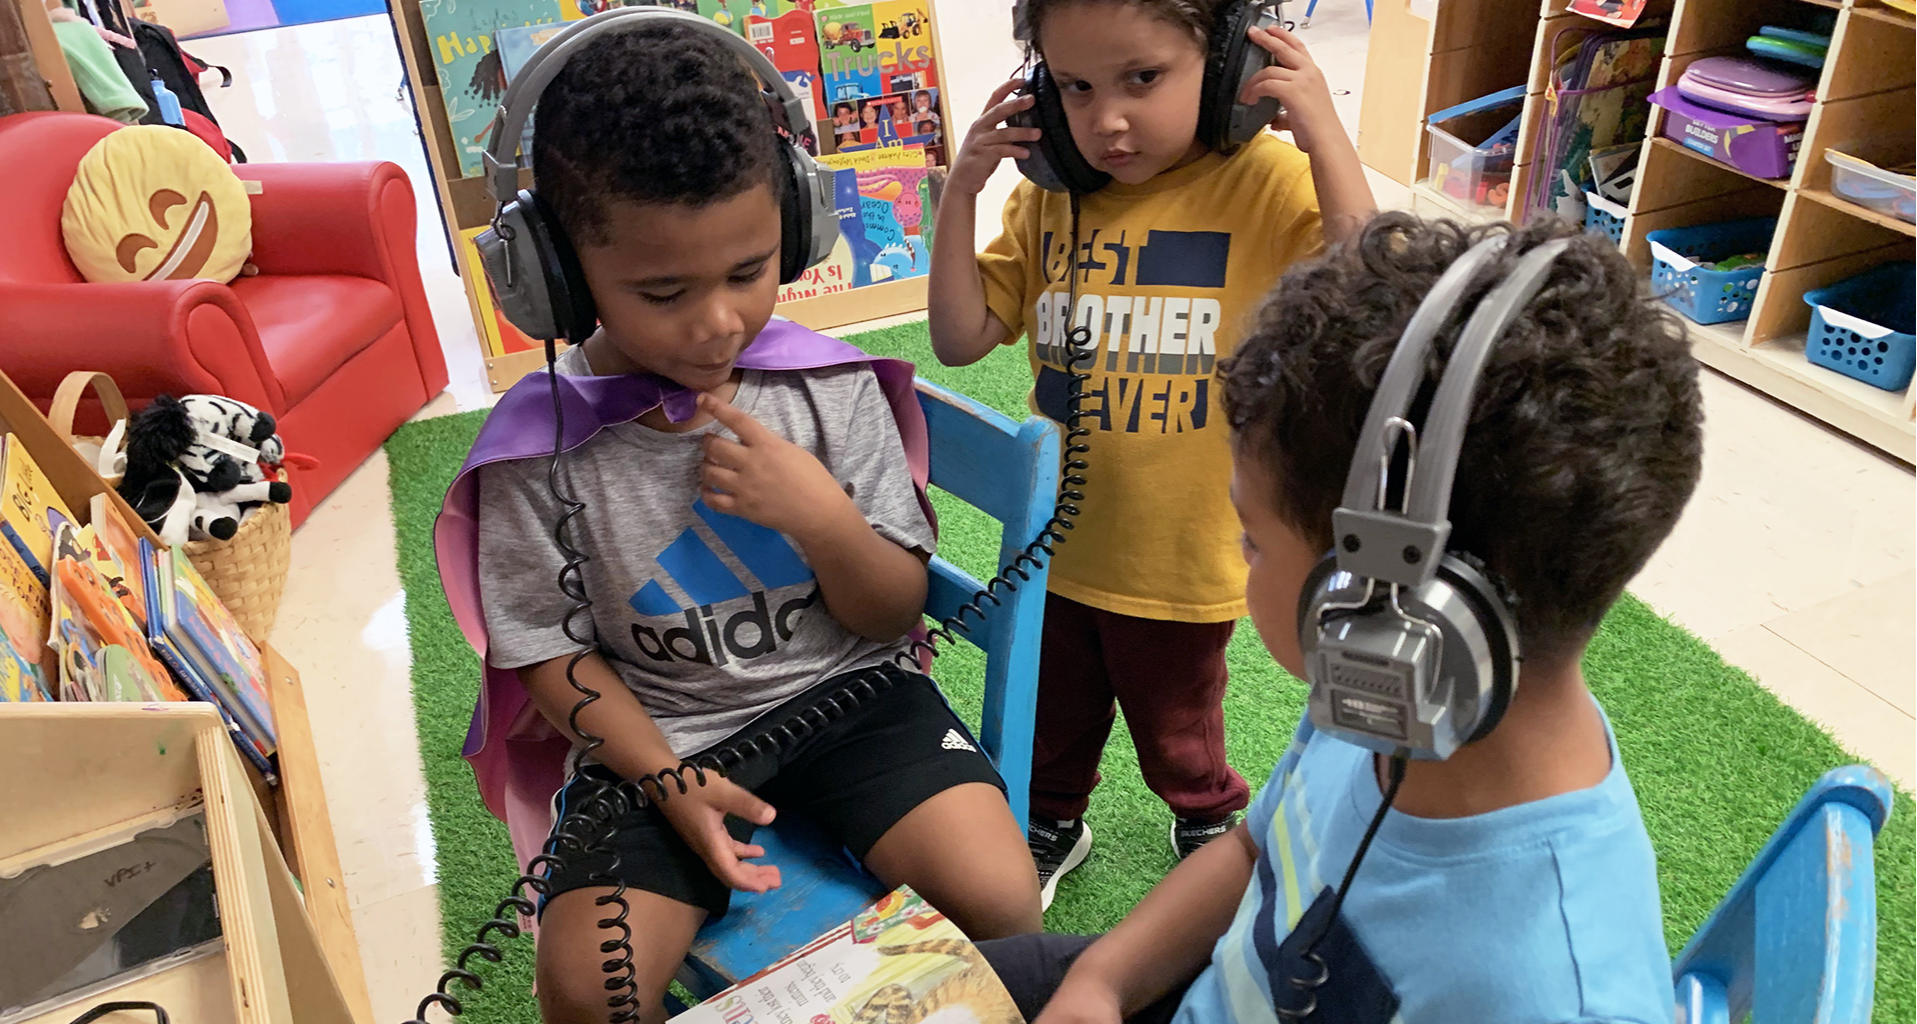 Three students wearing headphones and following along with a book